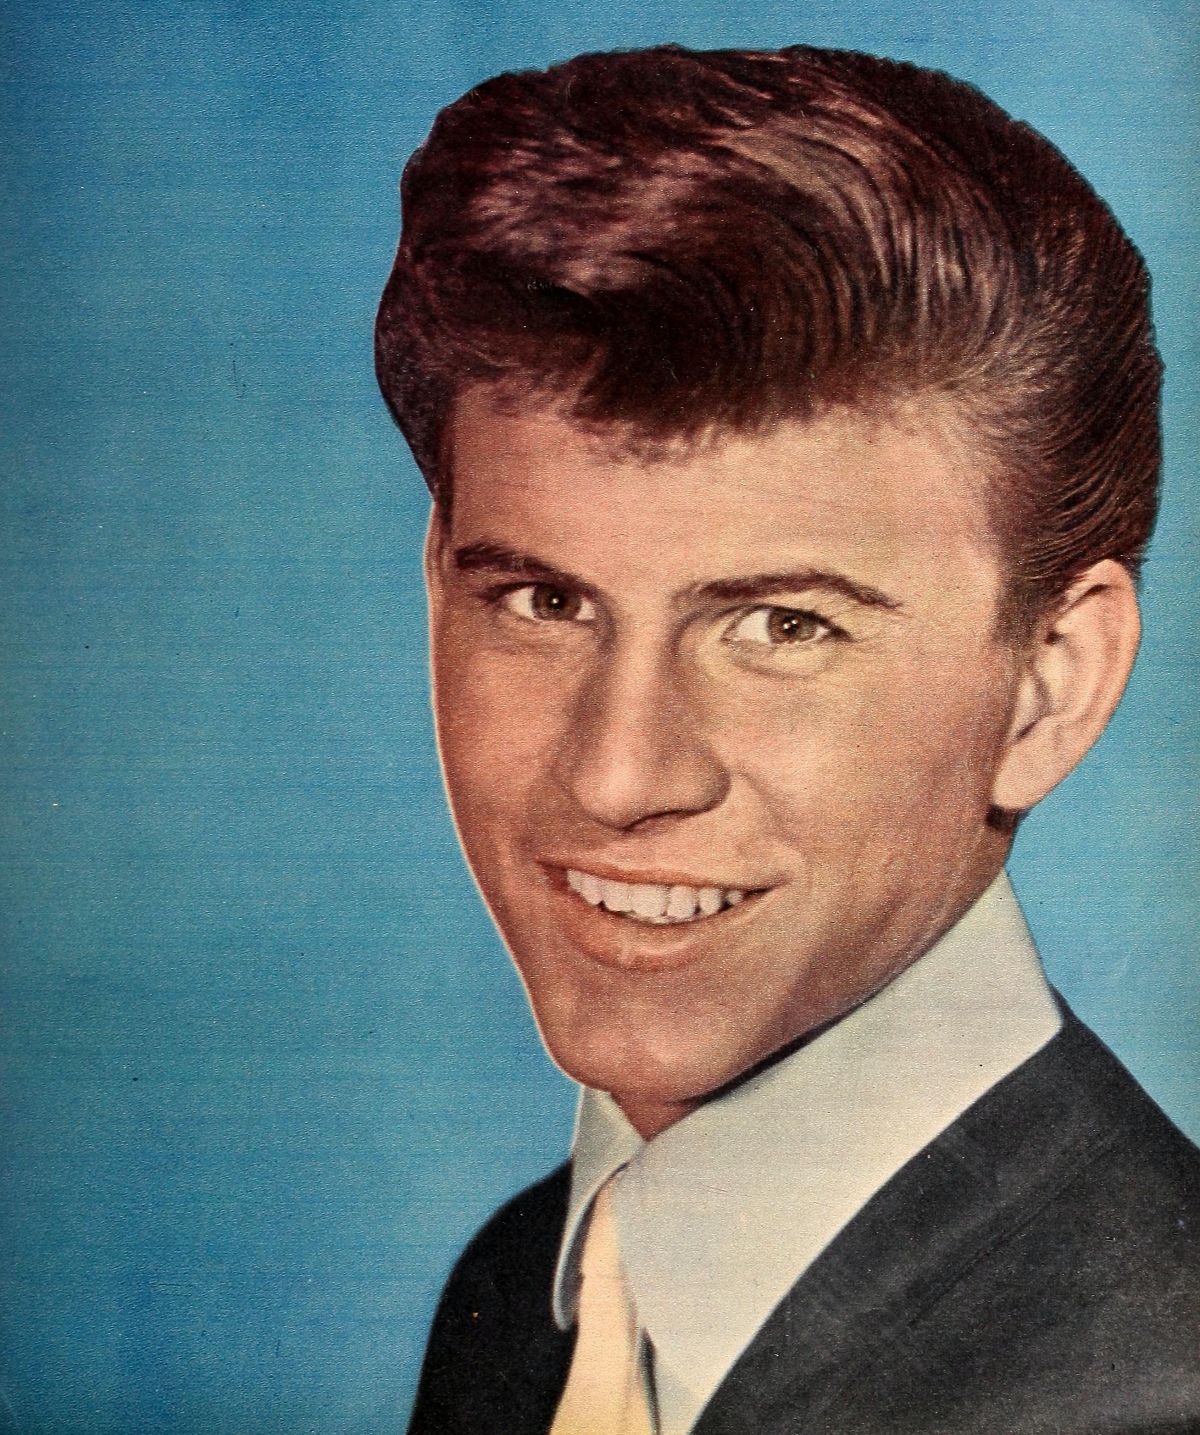 publicity photo of Bobby Rydell from 1960